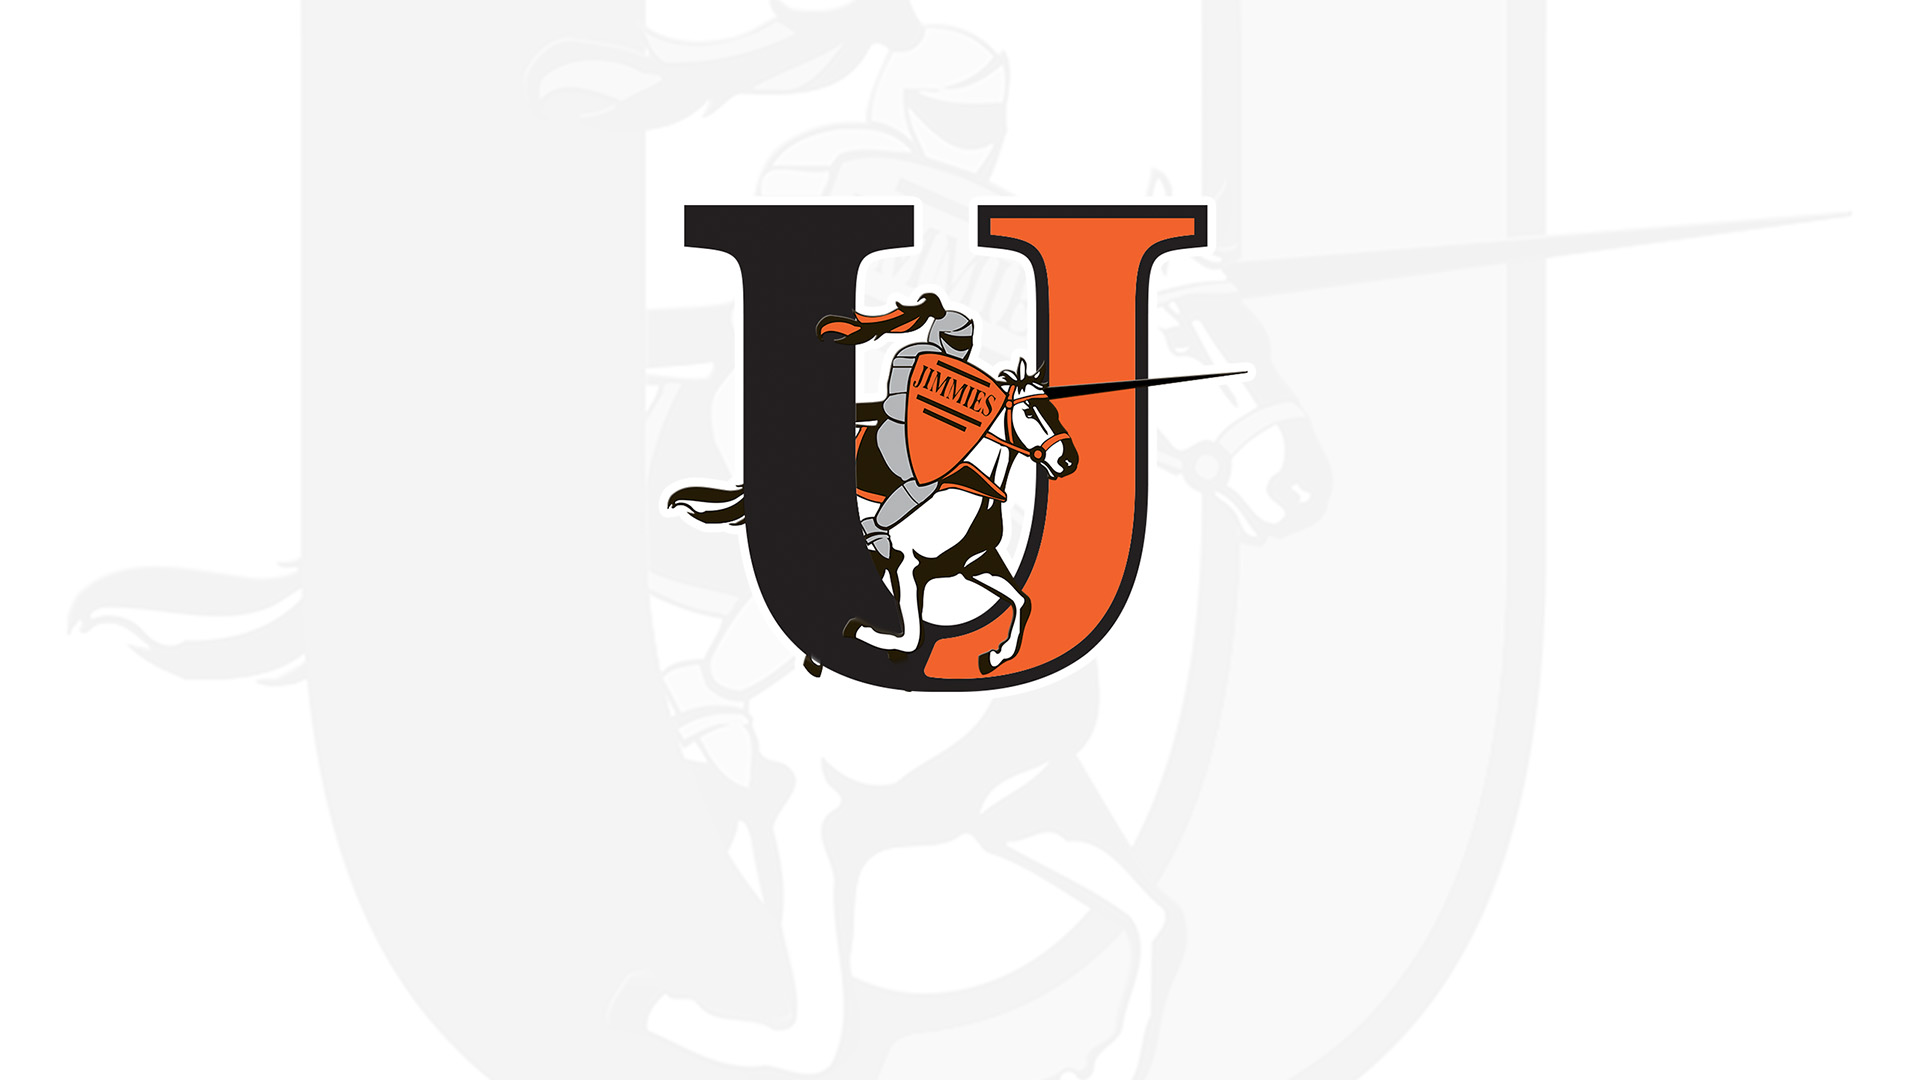 University of Jamestown Excels in 5 Spot Shoot Archery Competition